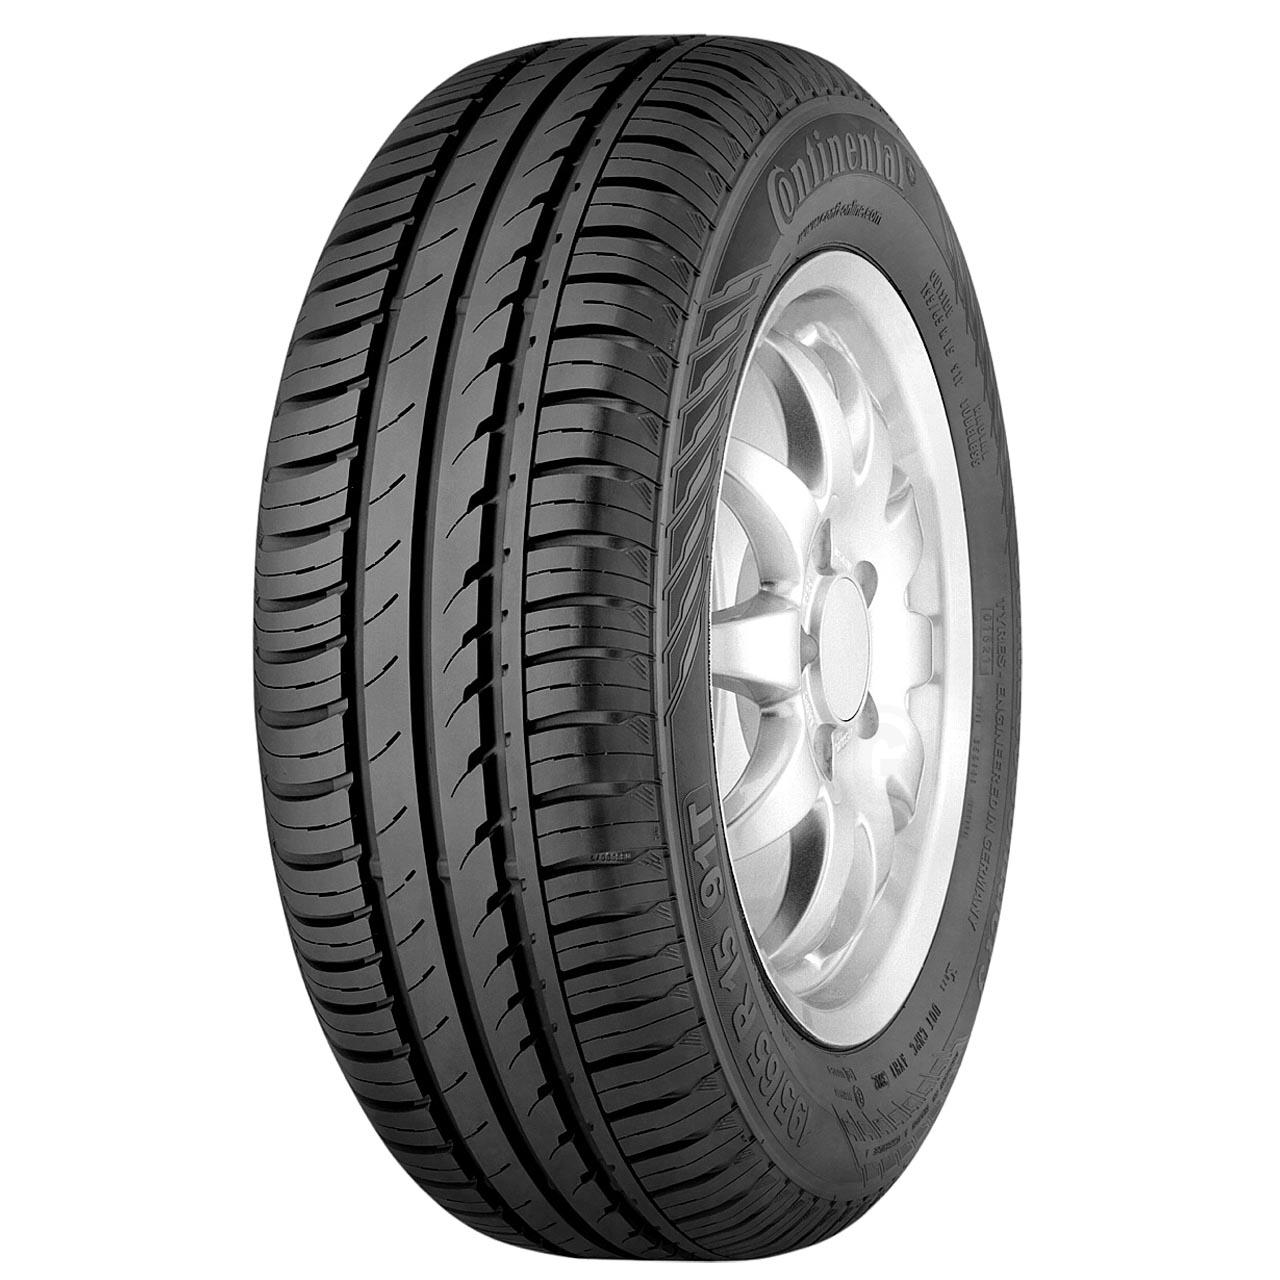 Continental CONTIECOCONTACT 3 175/65R14 86T XL FOR